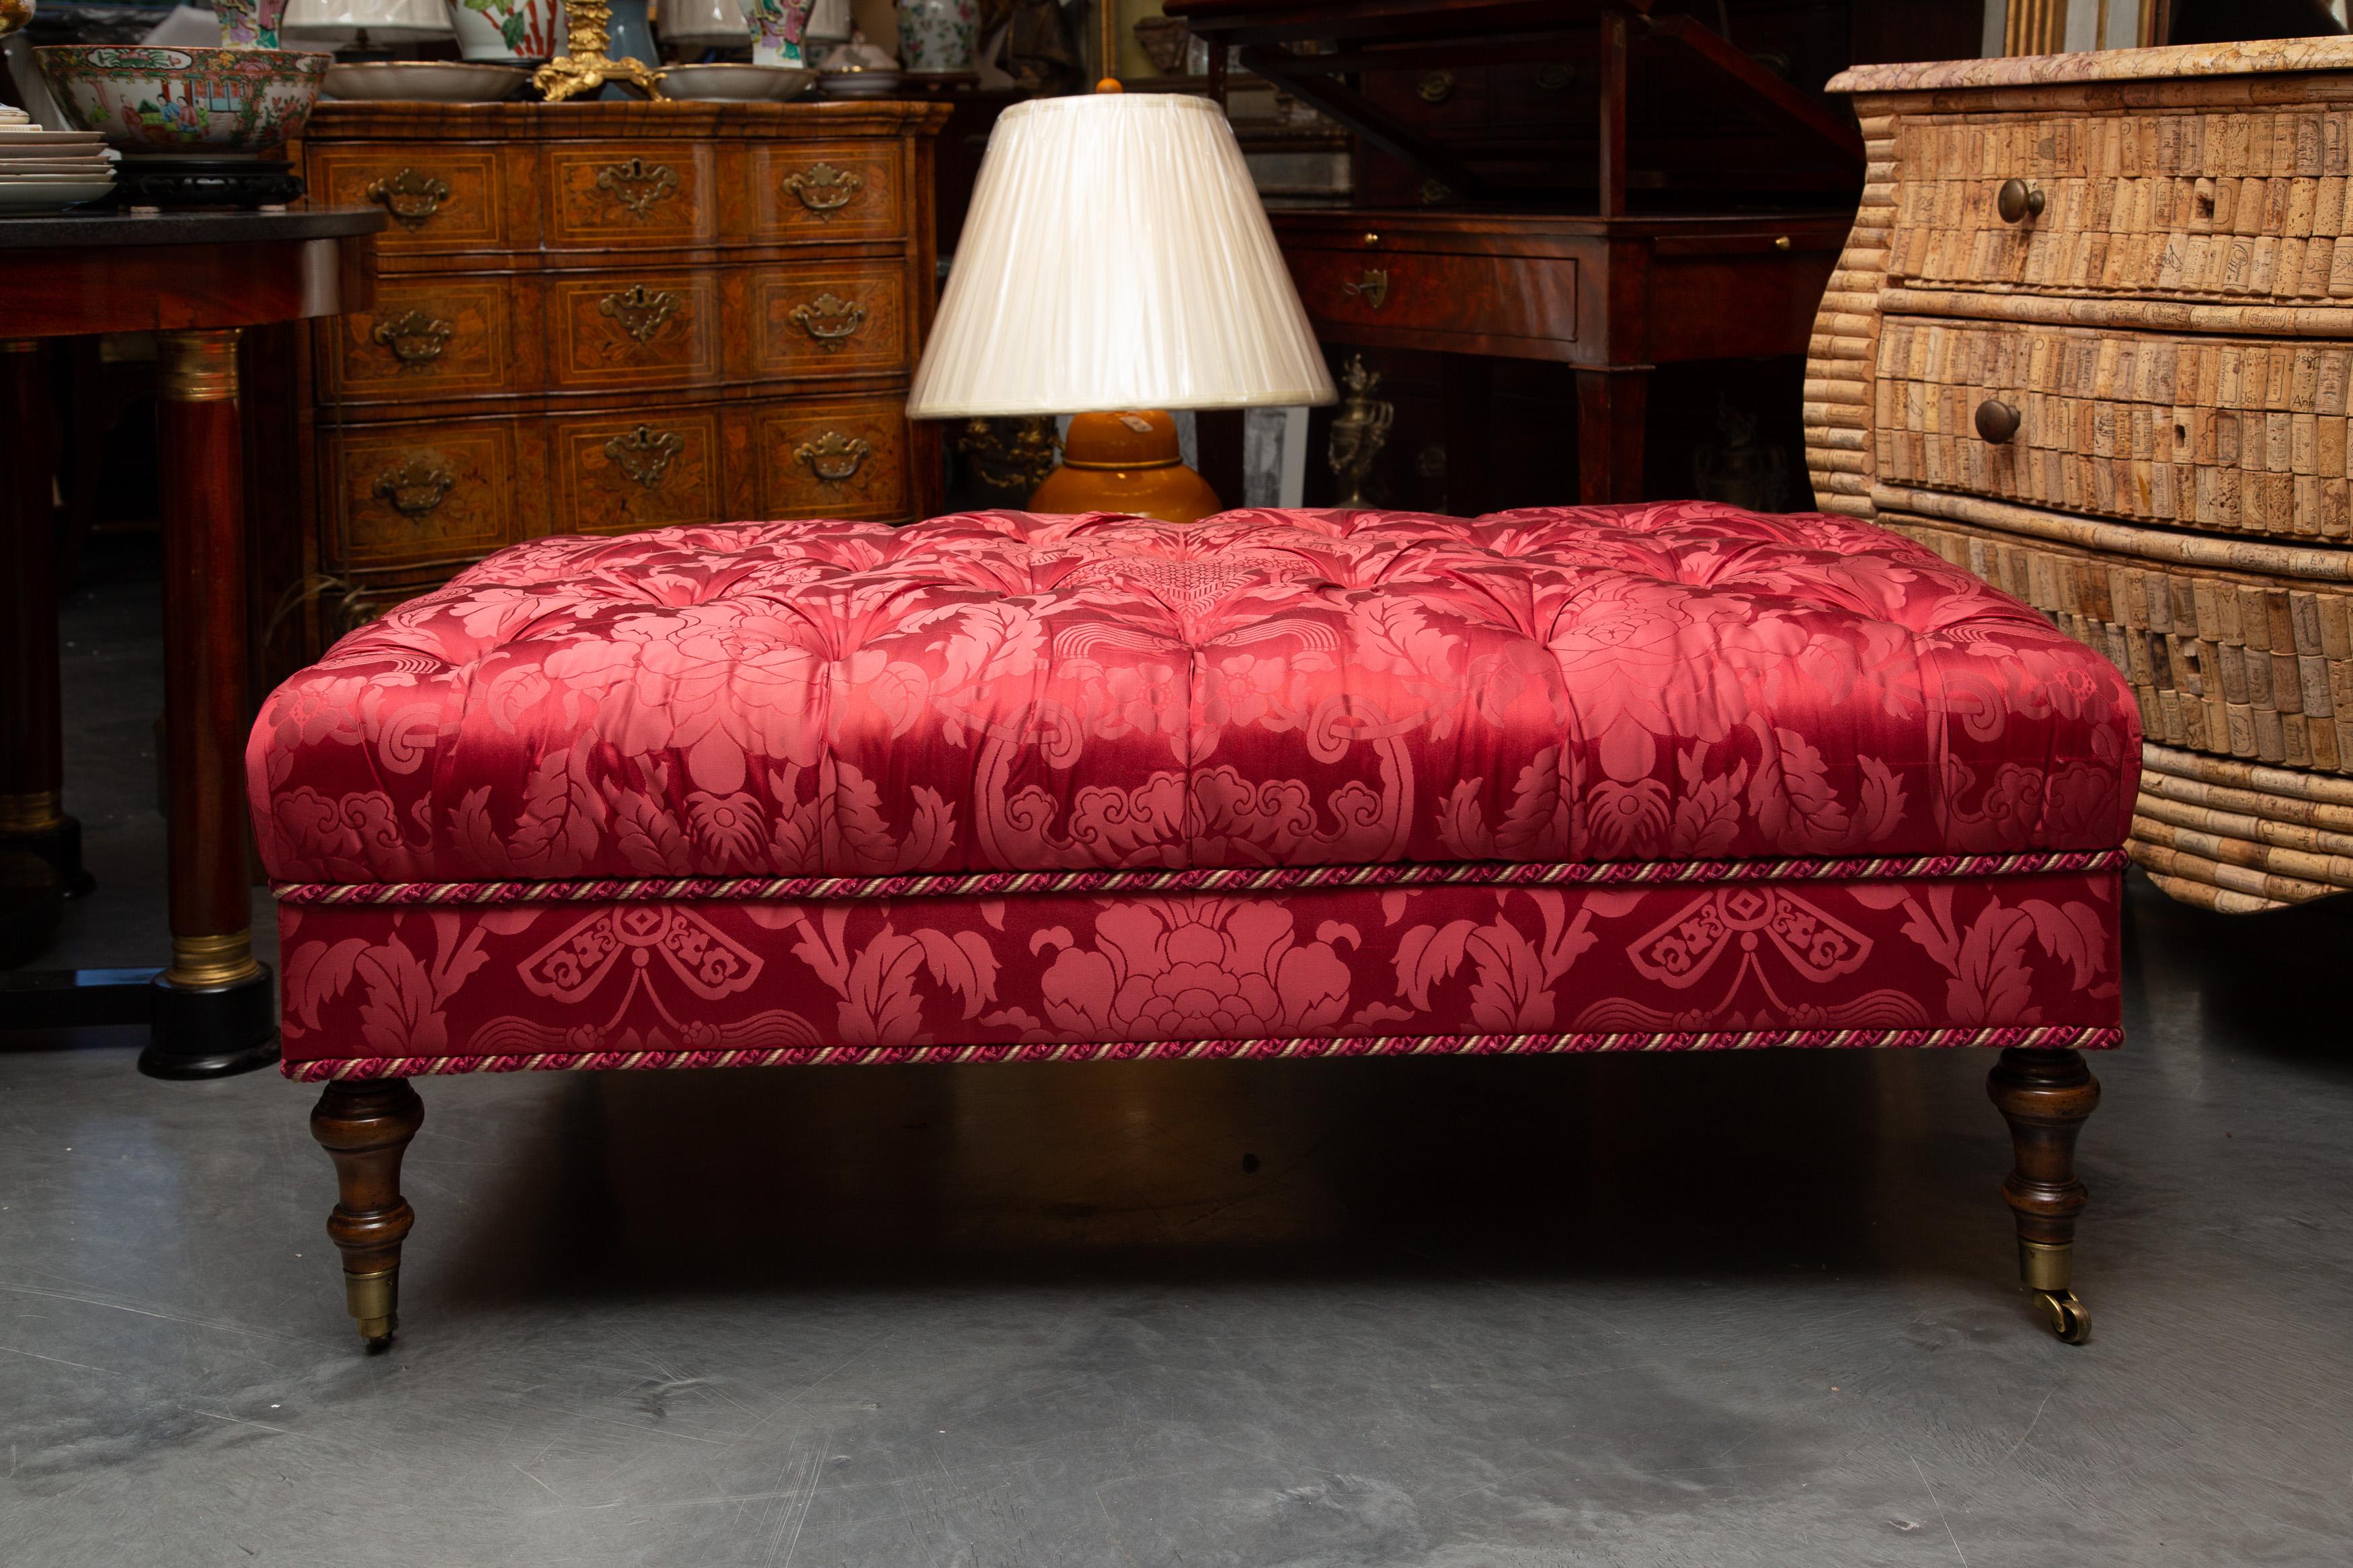 This is an exceptionally custom-made upholstered bench.